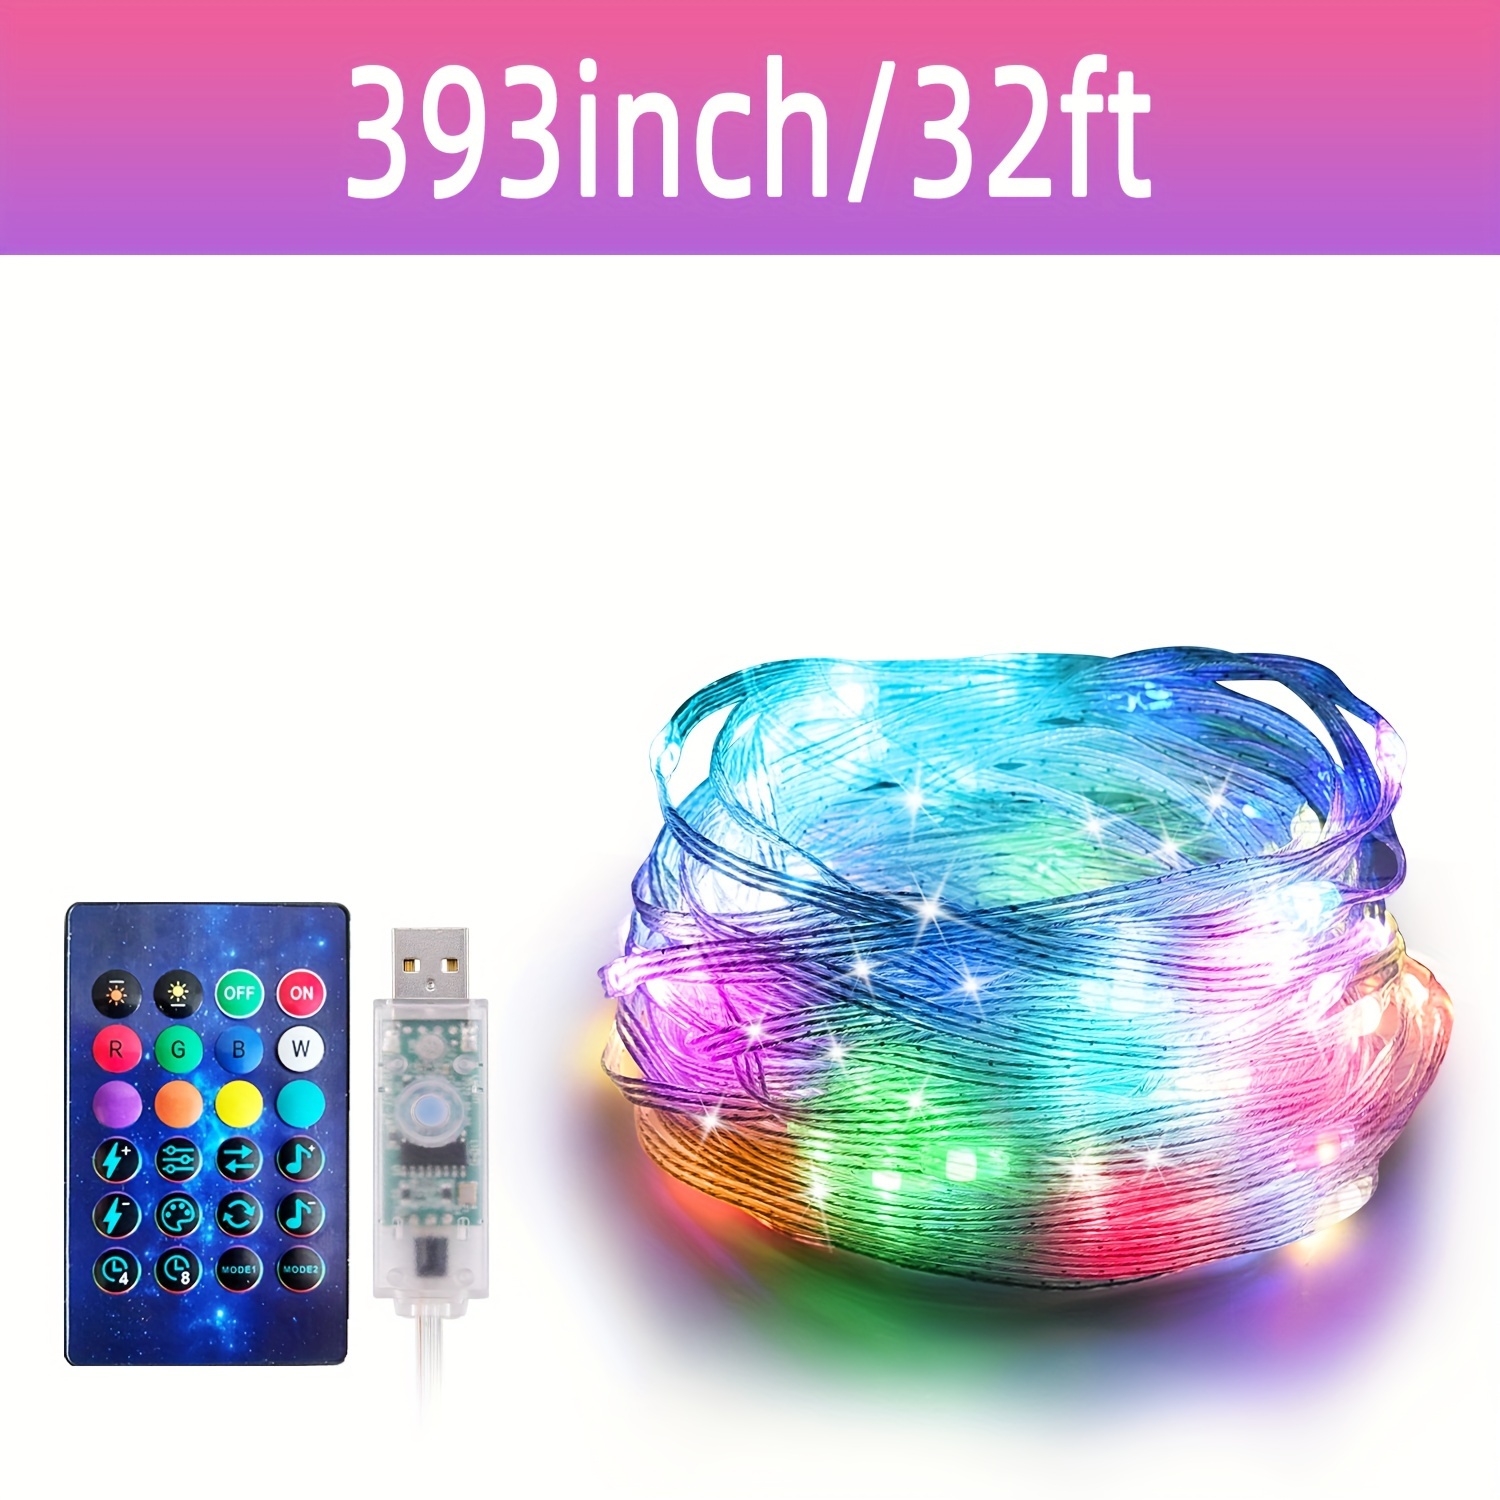 🔥Last Day Promotion - 50% Off / APP Controlled, Voice Controlled Rhythm Color Changing Atmosphere Light Strip